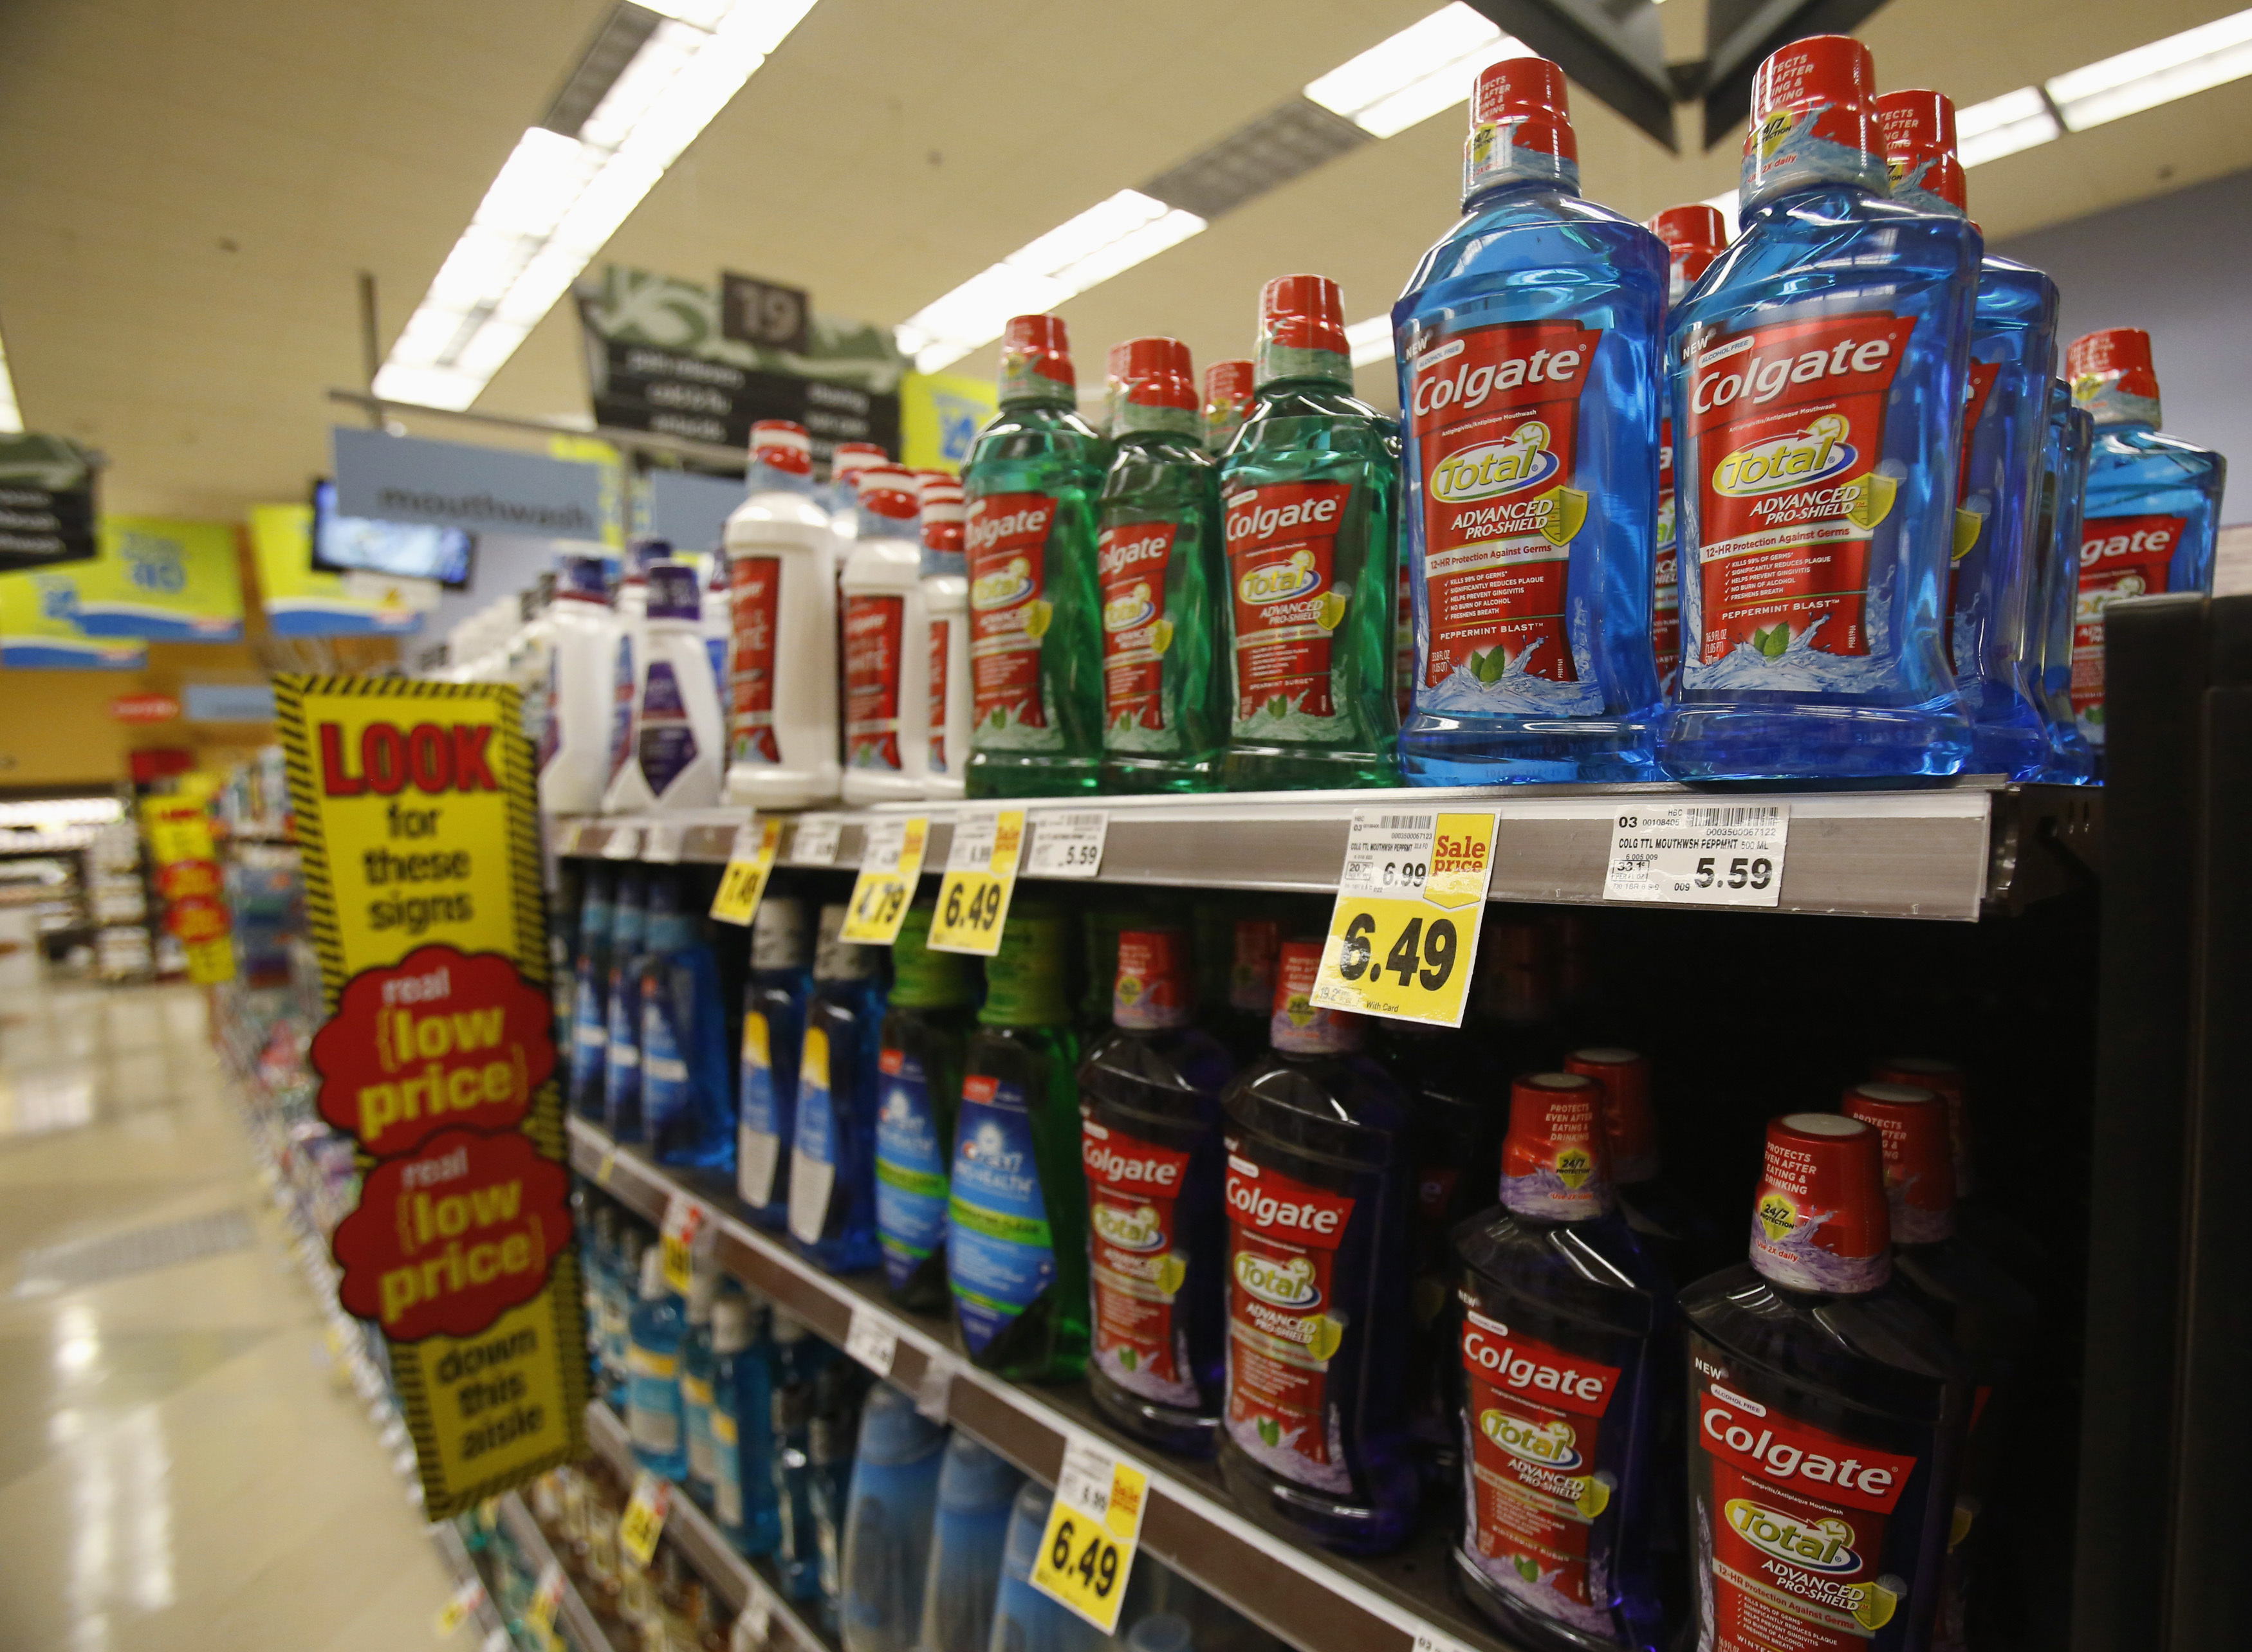 Colgate mouthwash is pictured on sale at a grocery store in Pasadena